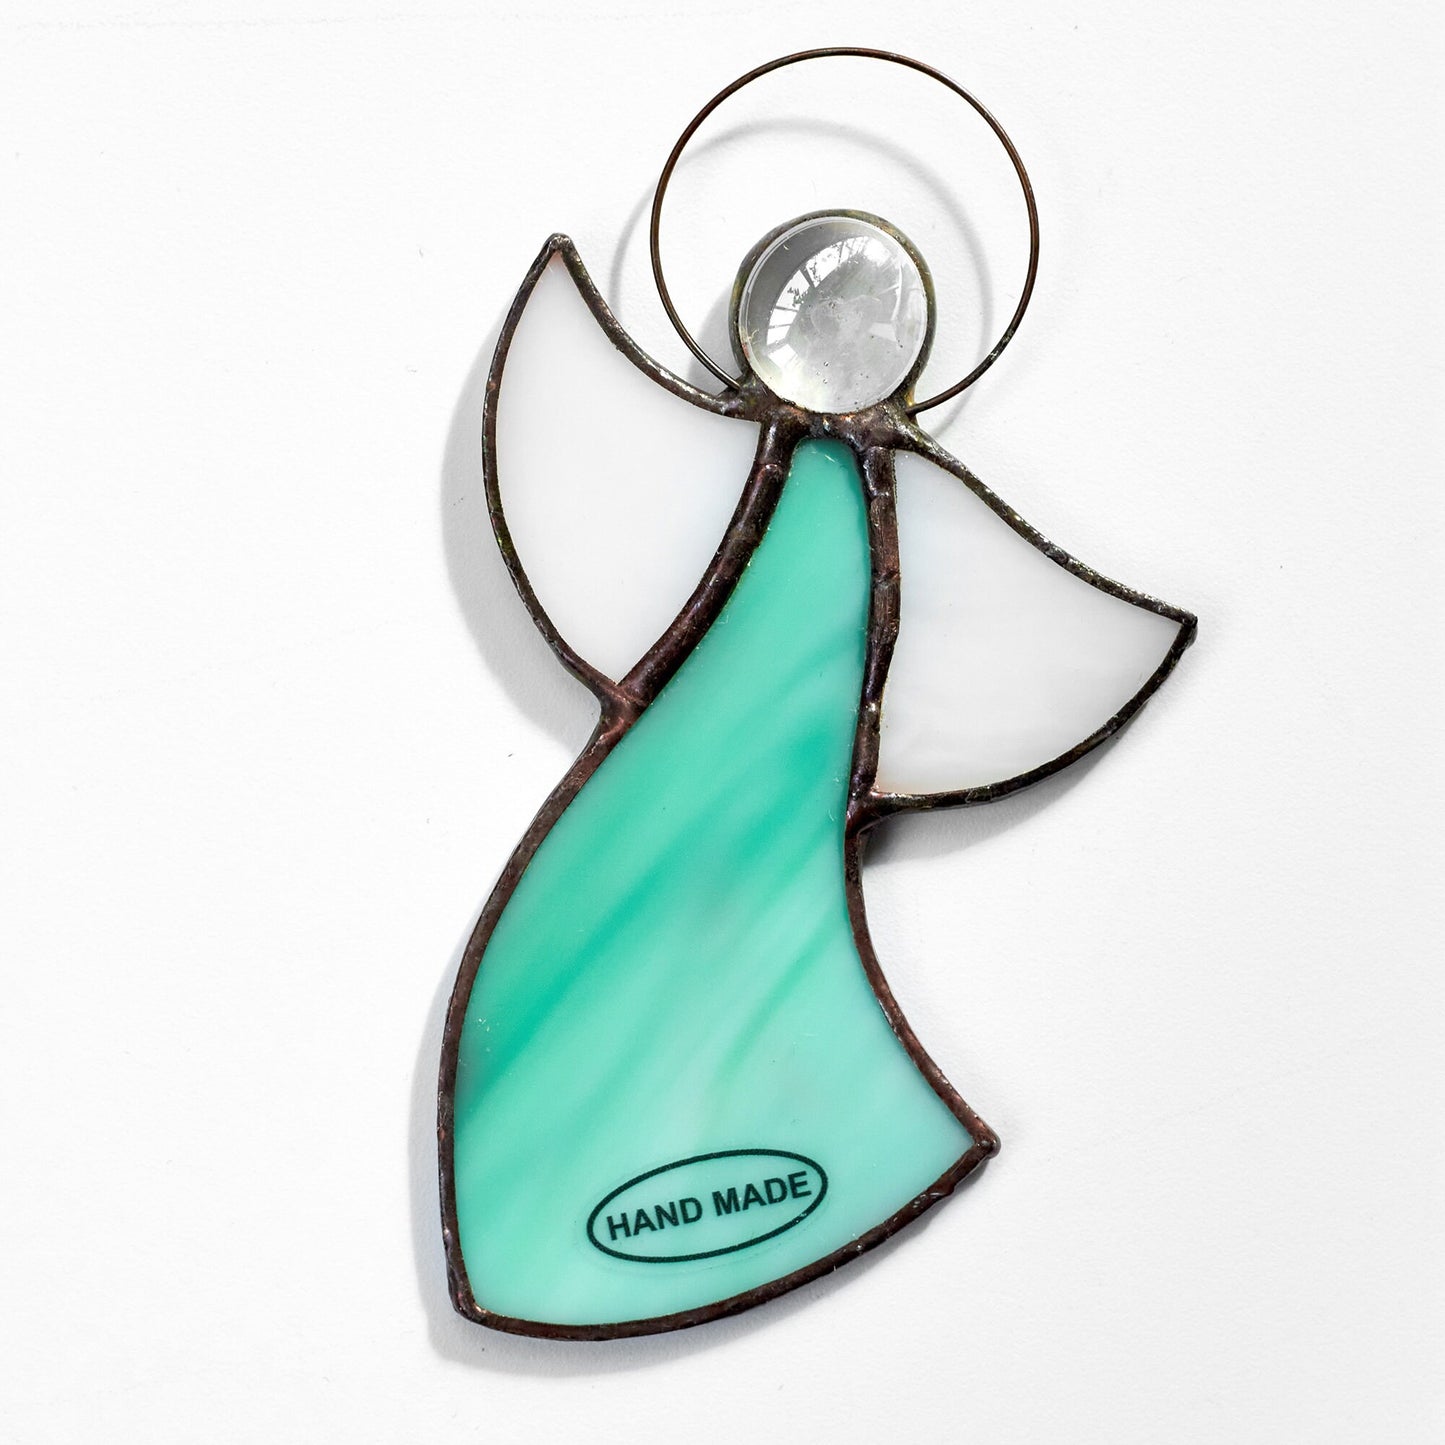 Stained Glass Dancing Angel Ornament